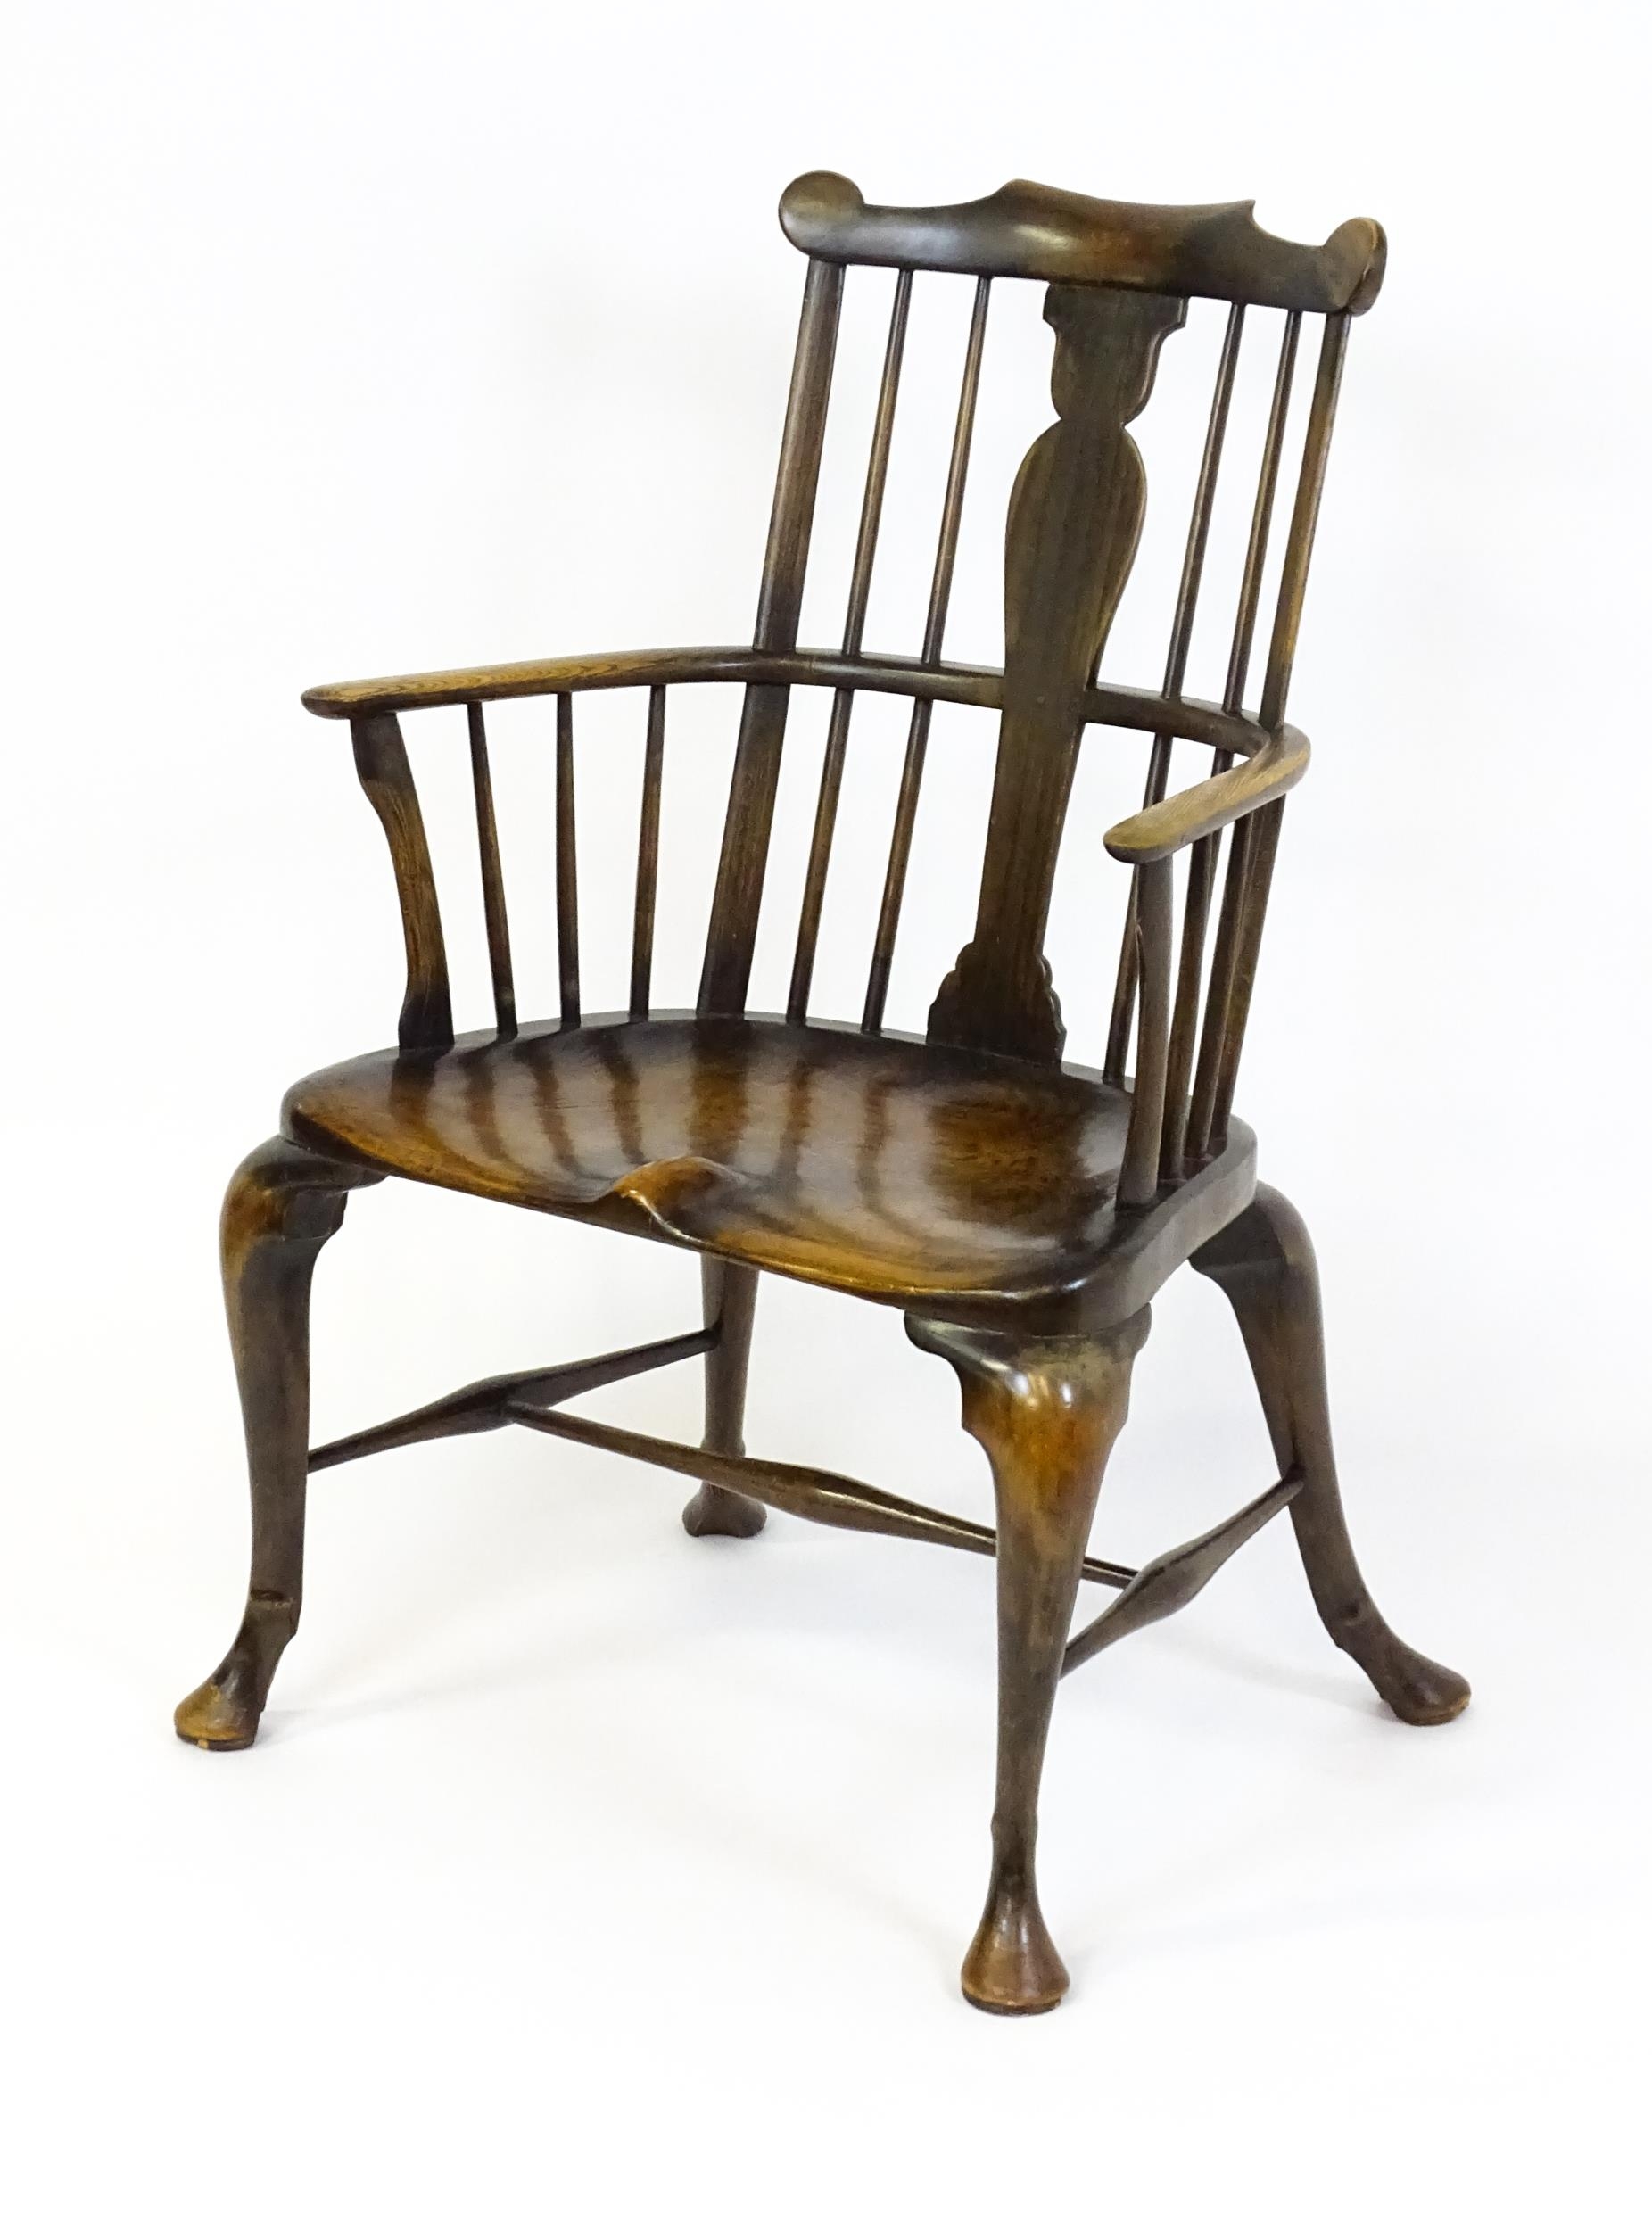 A late 19thC / early 20thC comb back Windsor chair with a vase shaped back splat and an unusually - Image 4 of 6